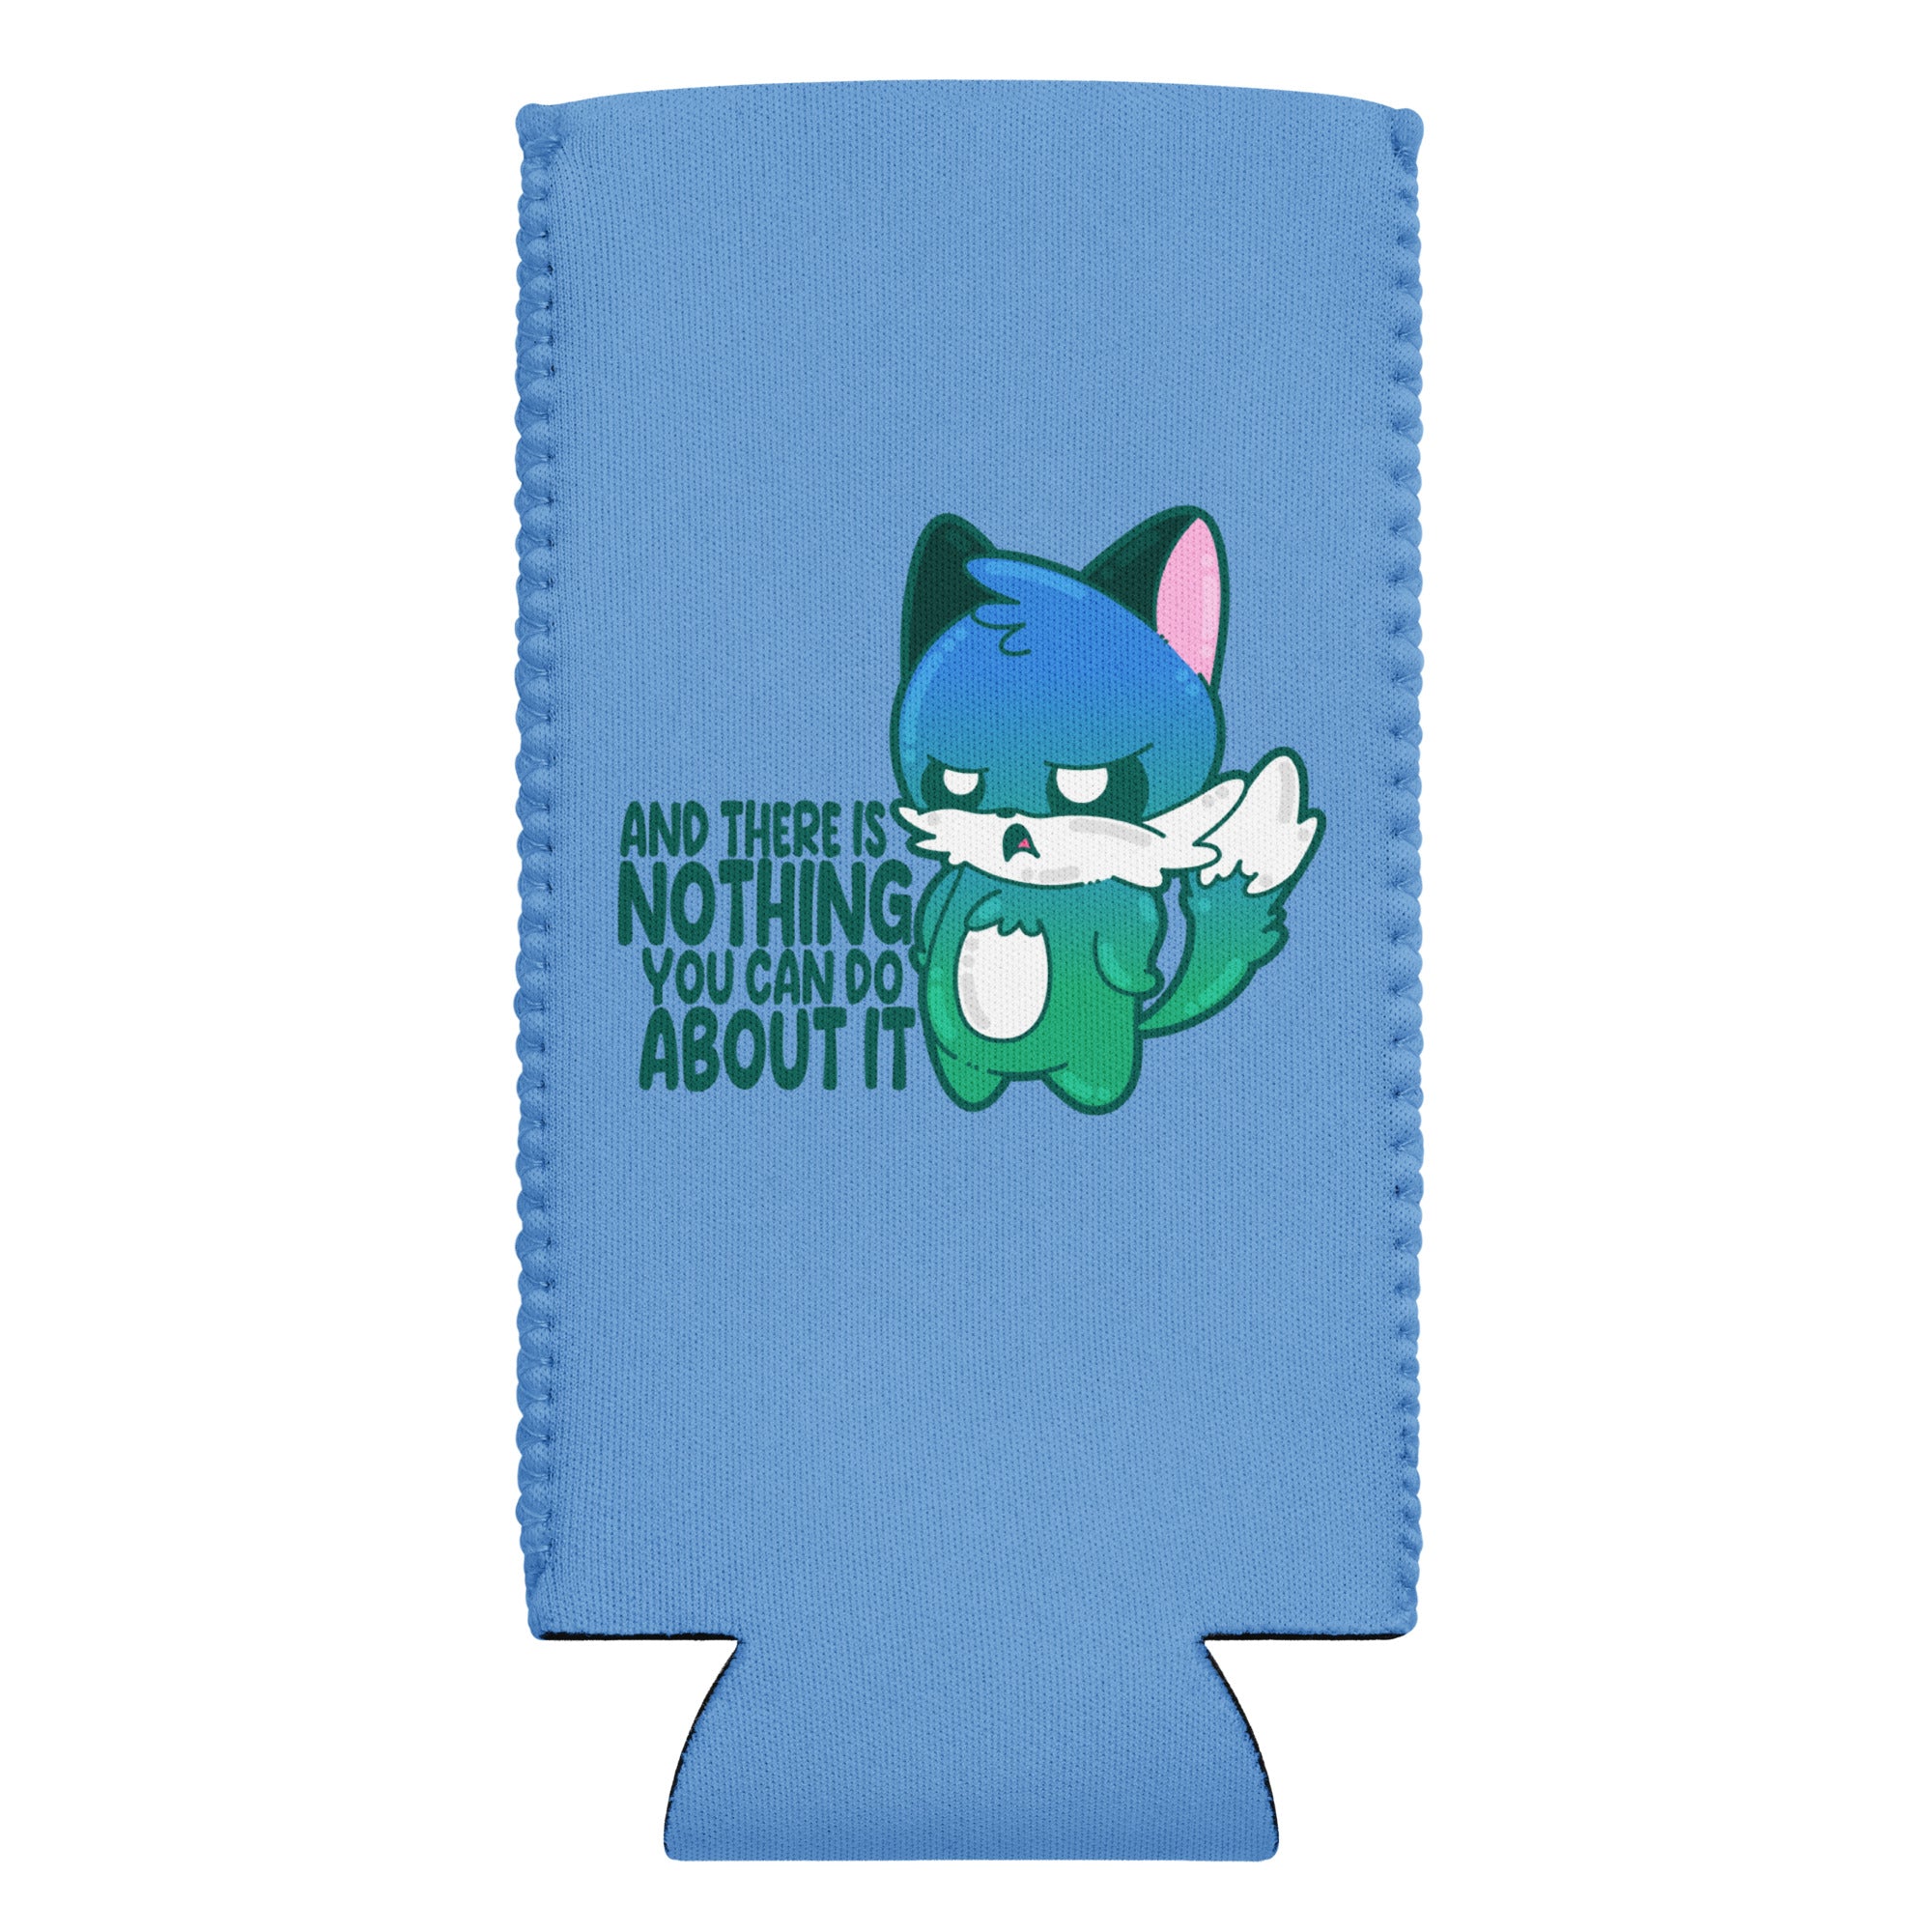 AND THERES NOTHING YOU CAN DO ABOUT IT - 12 oz Koozie